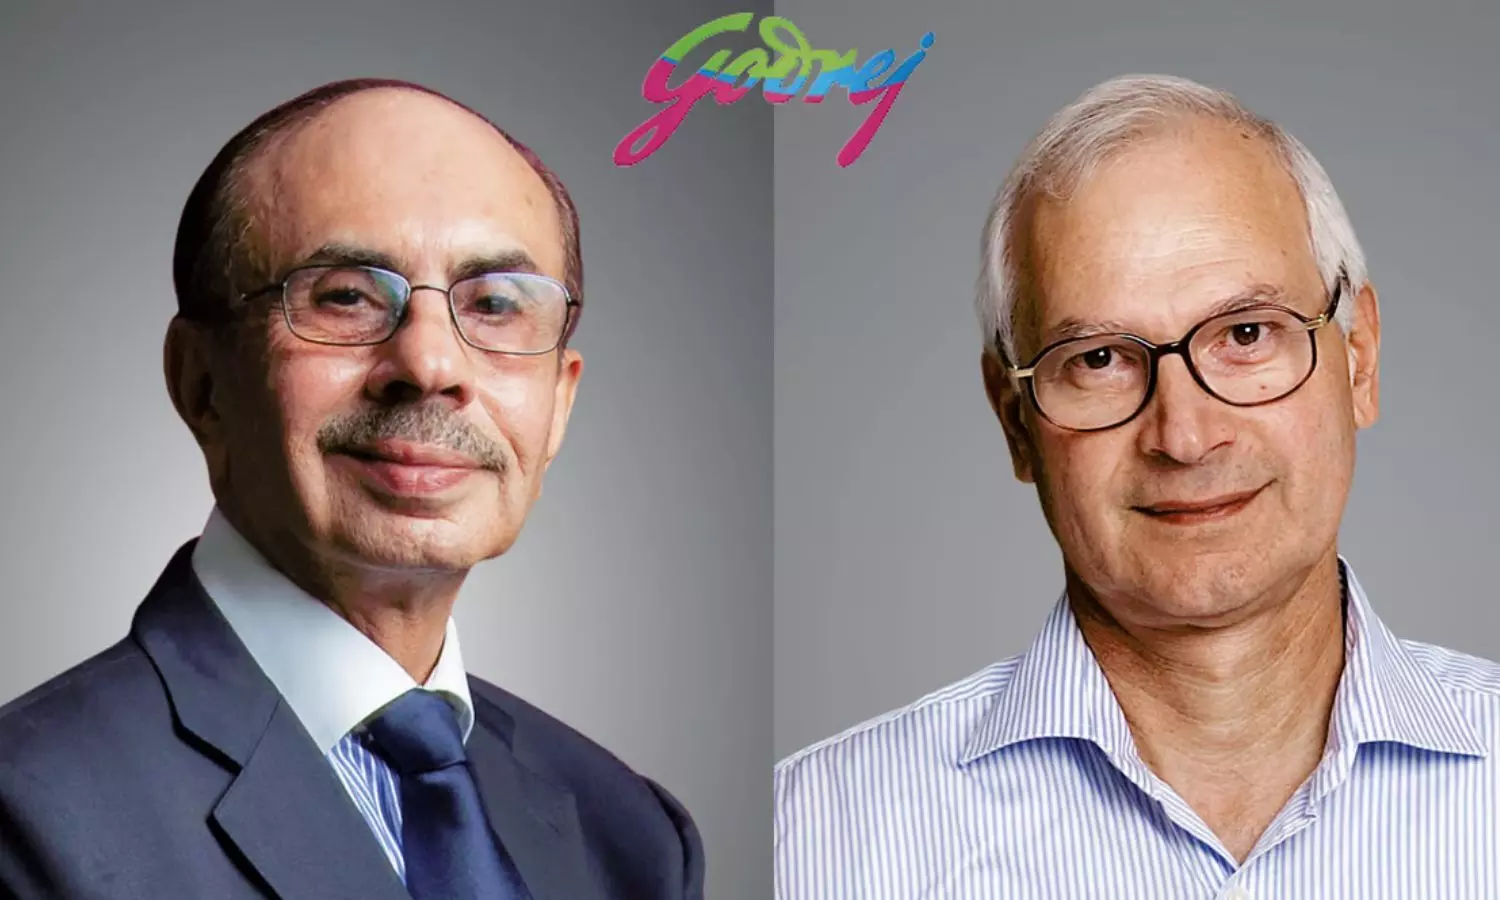 Godrej family agreement: Non-compete clause and brand usage terms